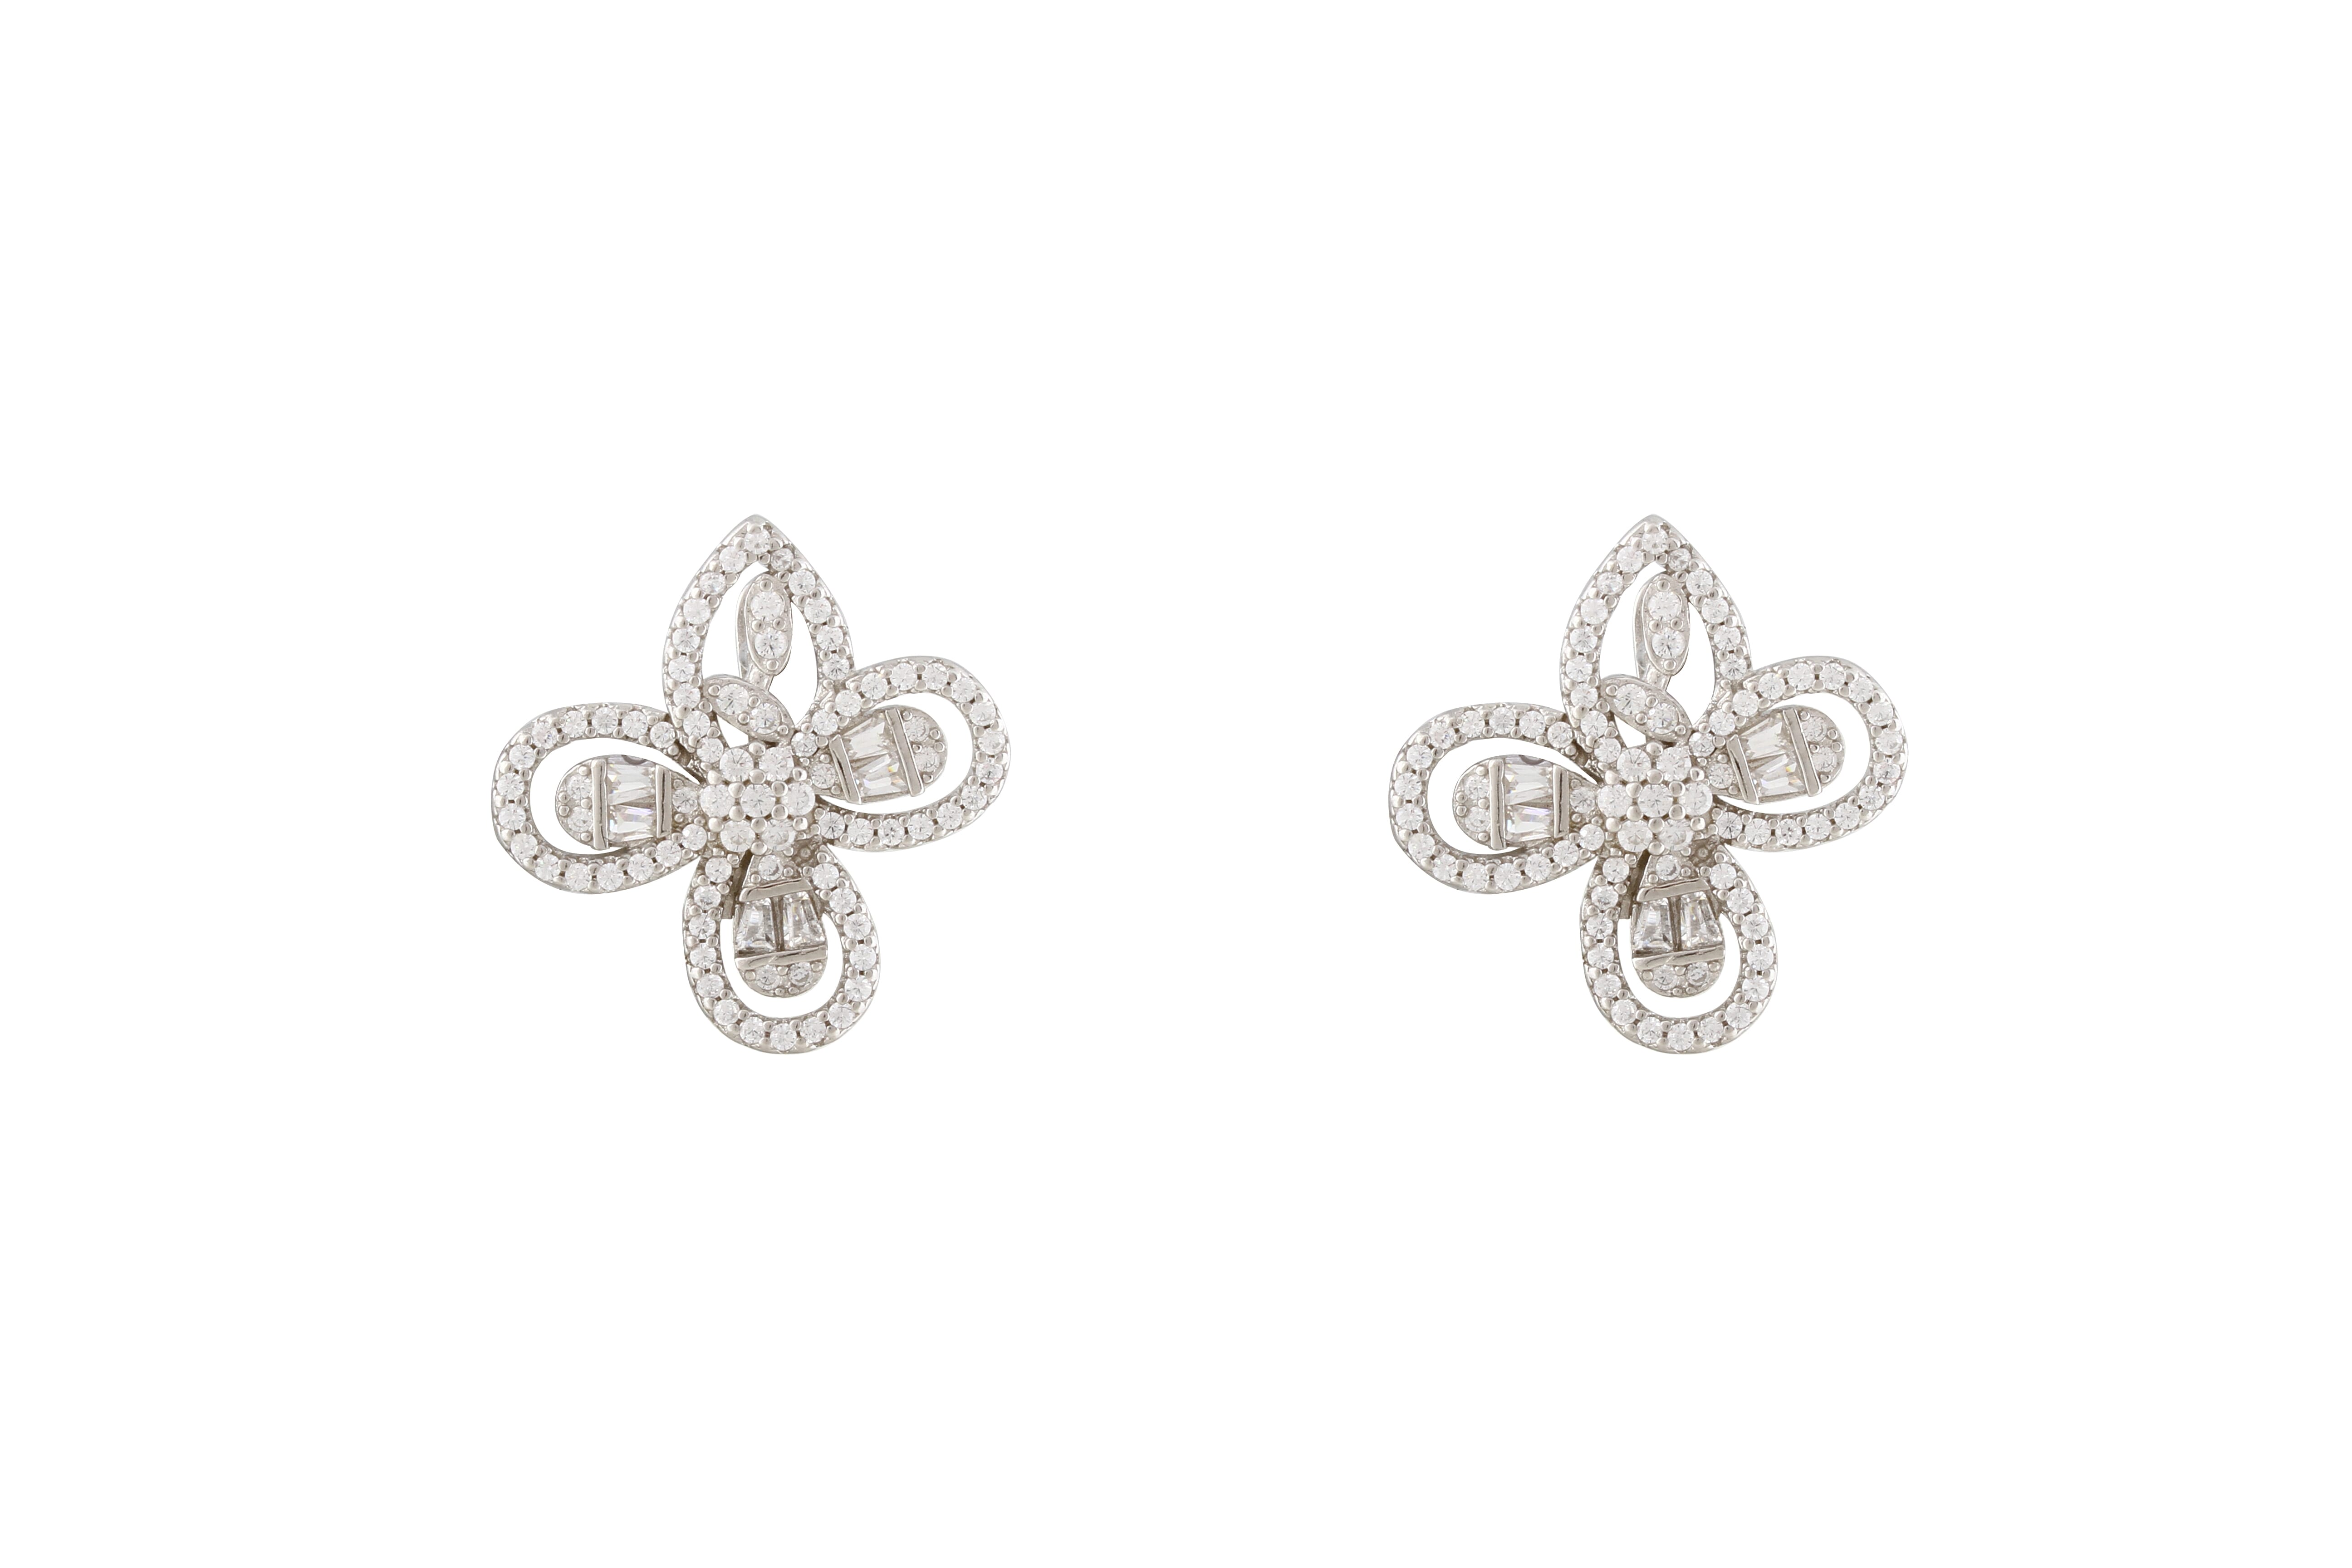 Asfour Clips Earrings With Flowerlace Design